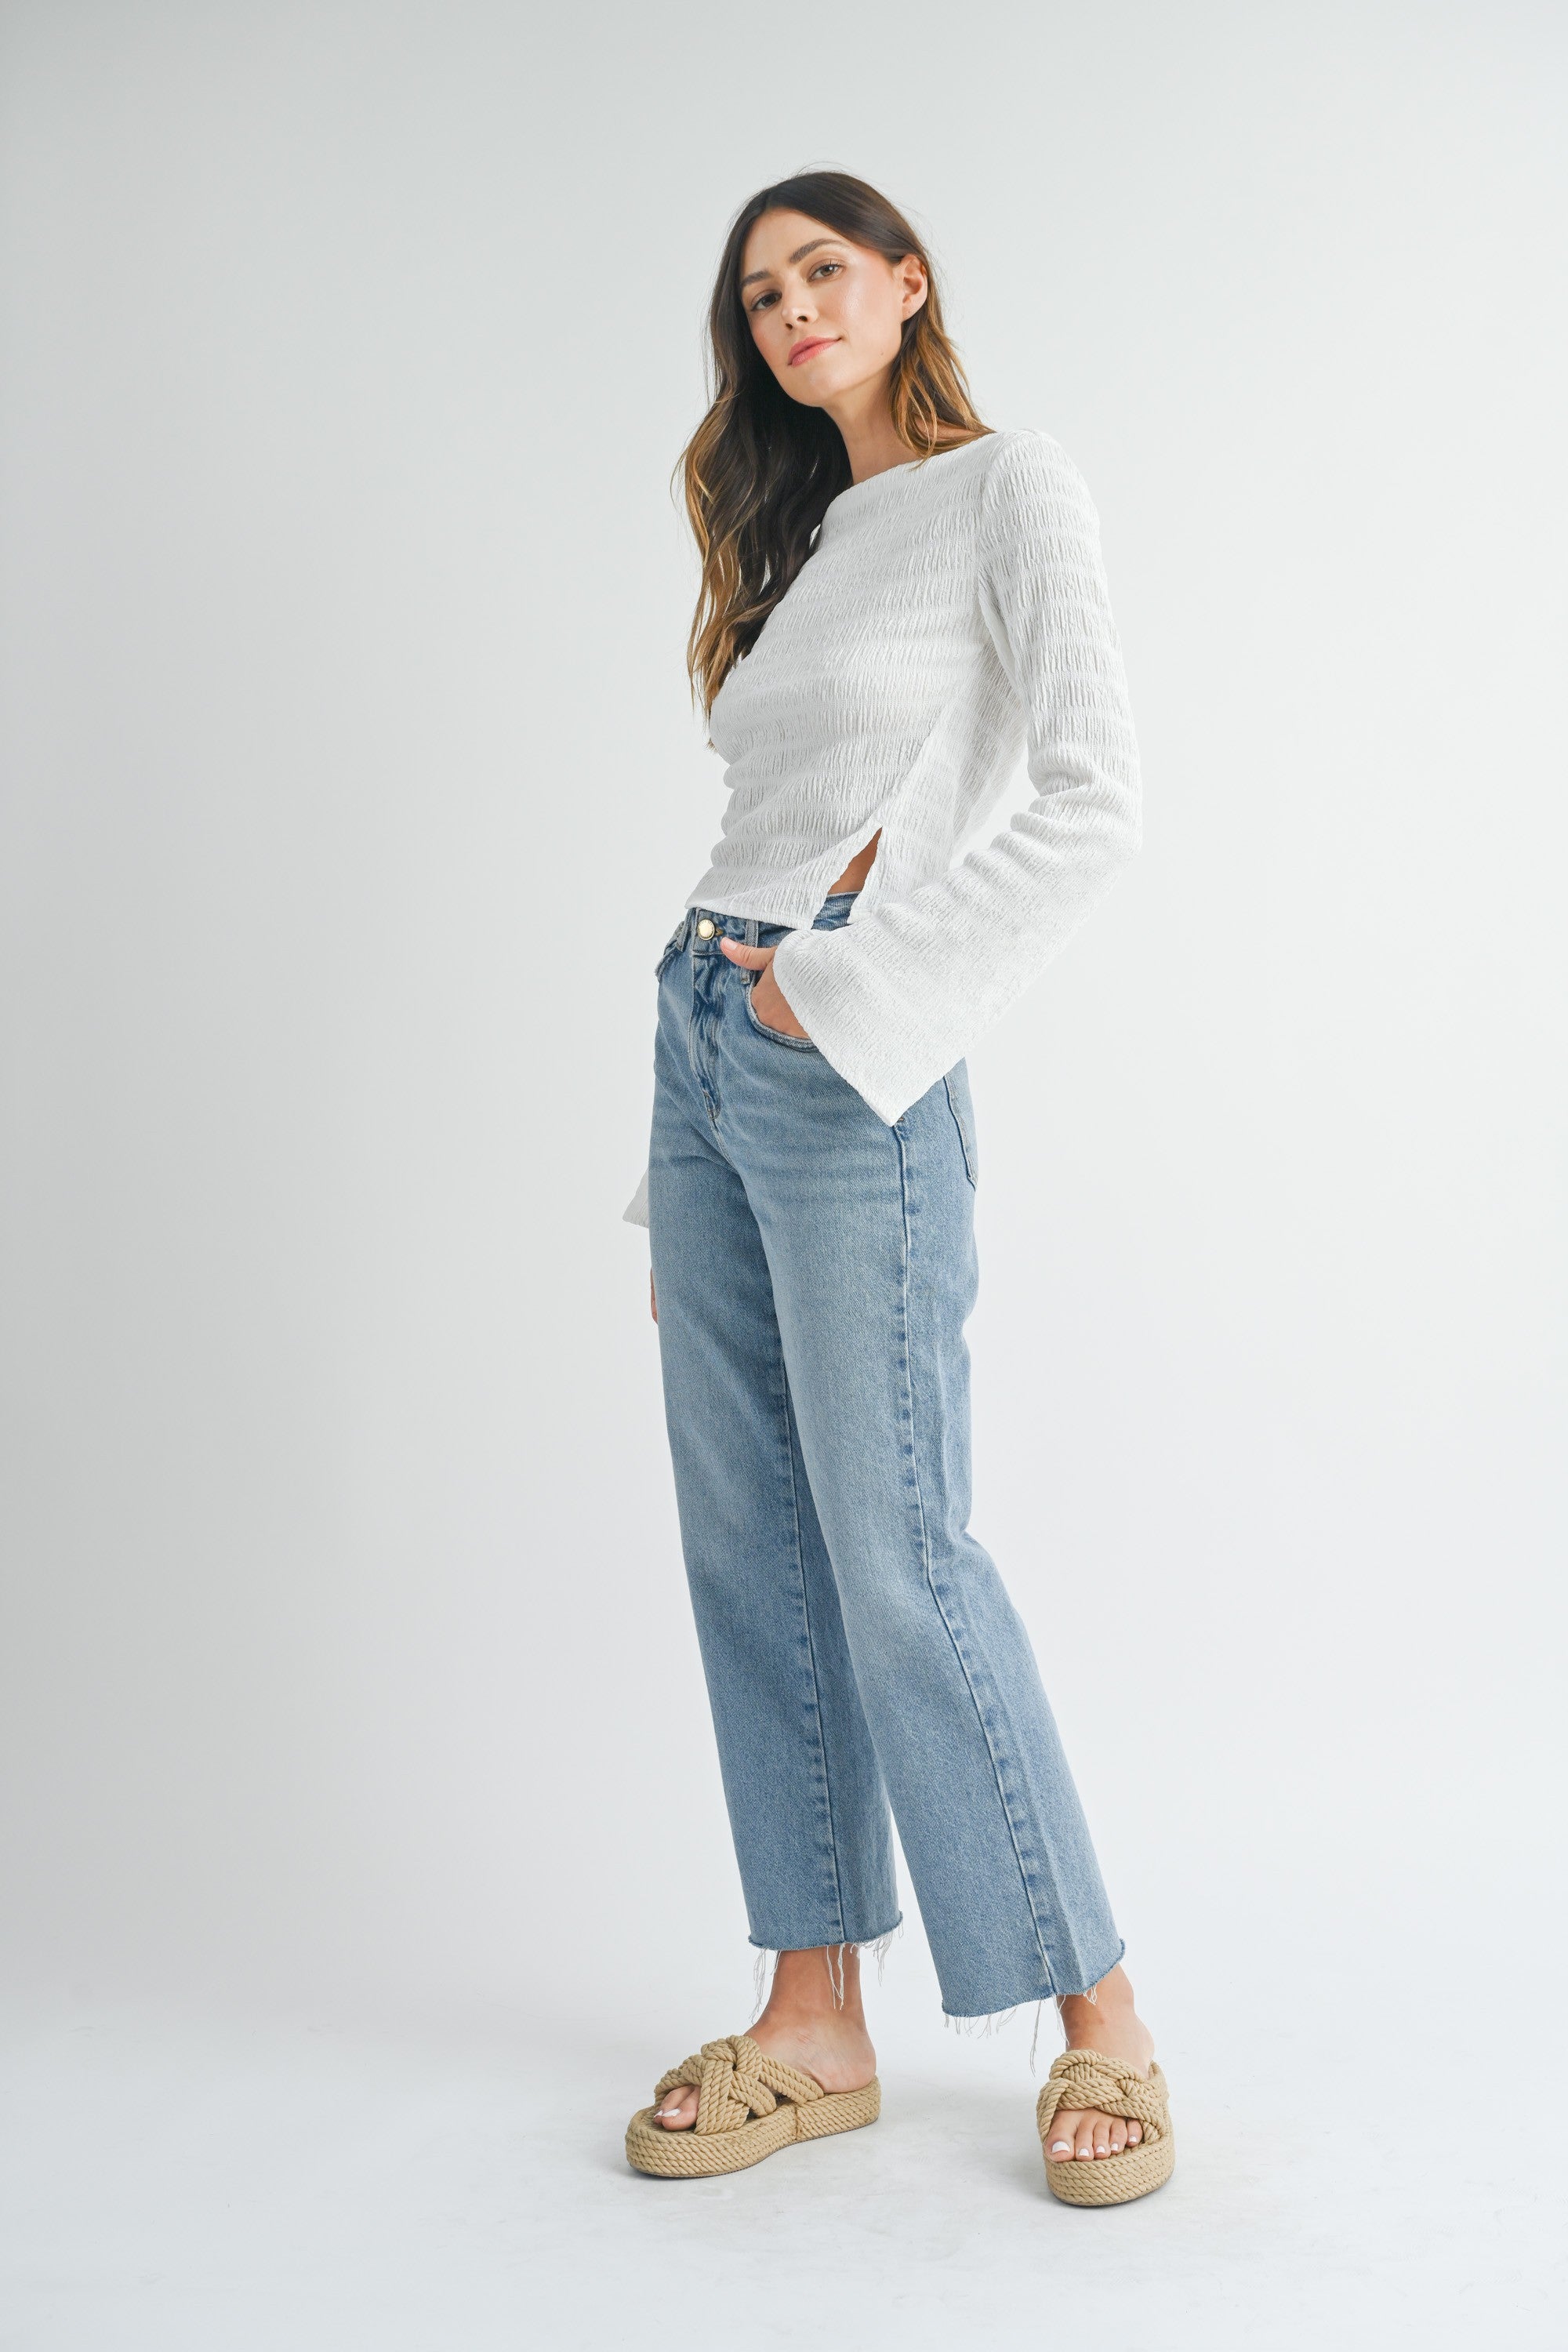 Textured Side Slit Boat Neck Top | Collective Request 